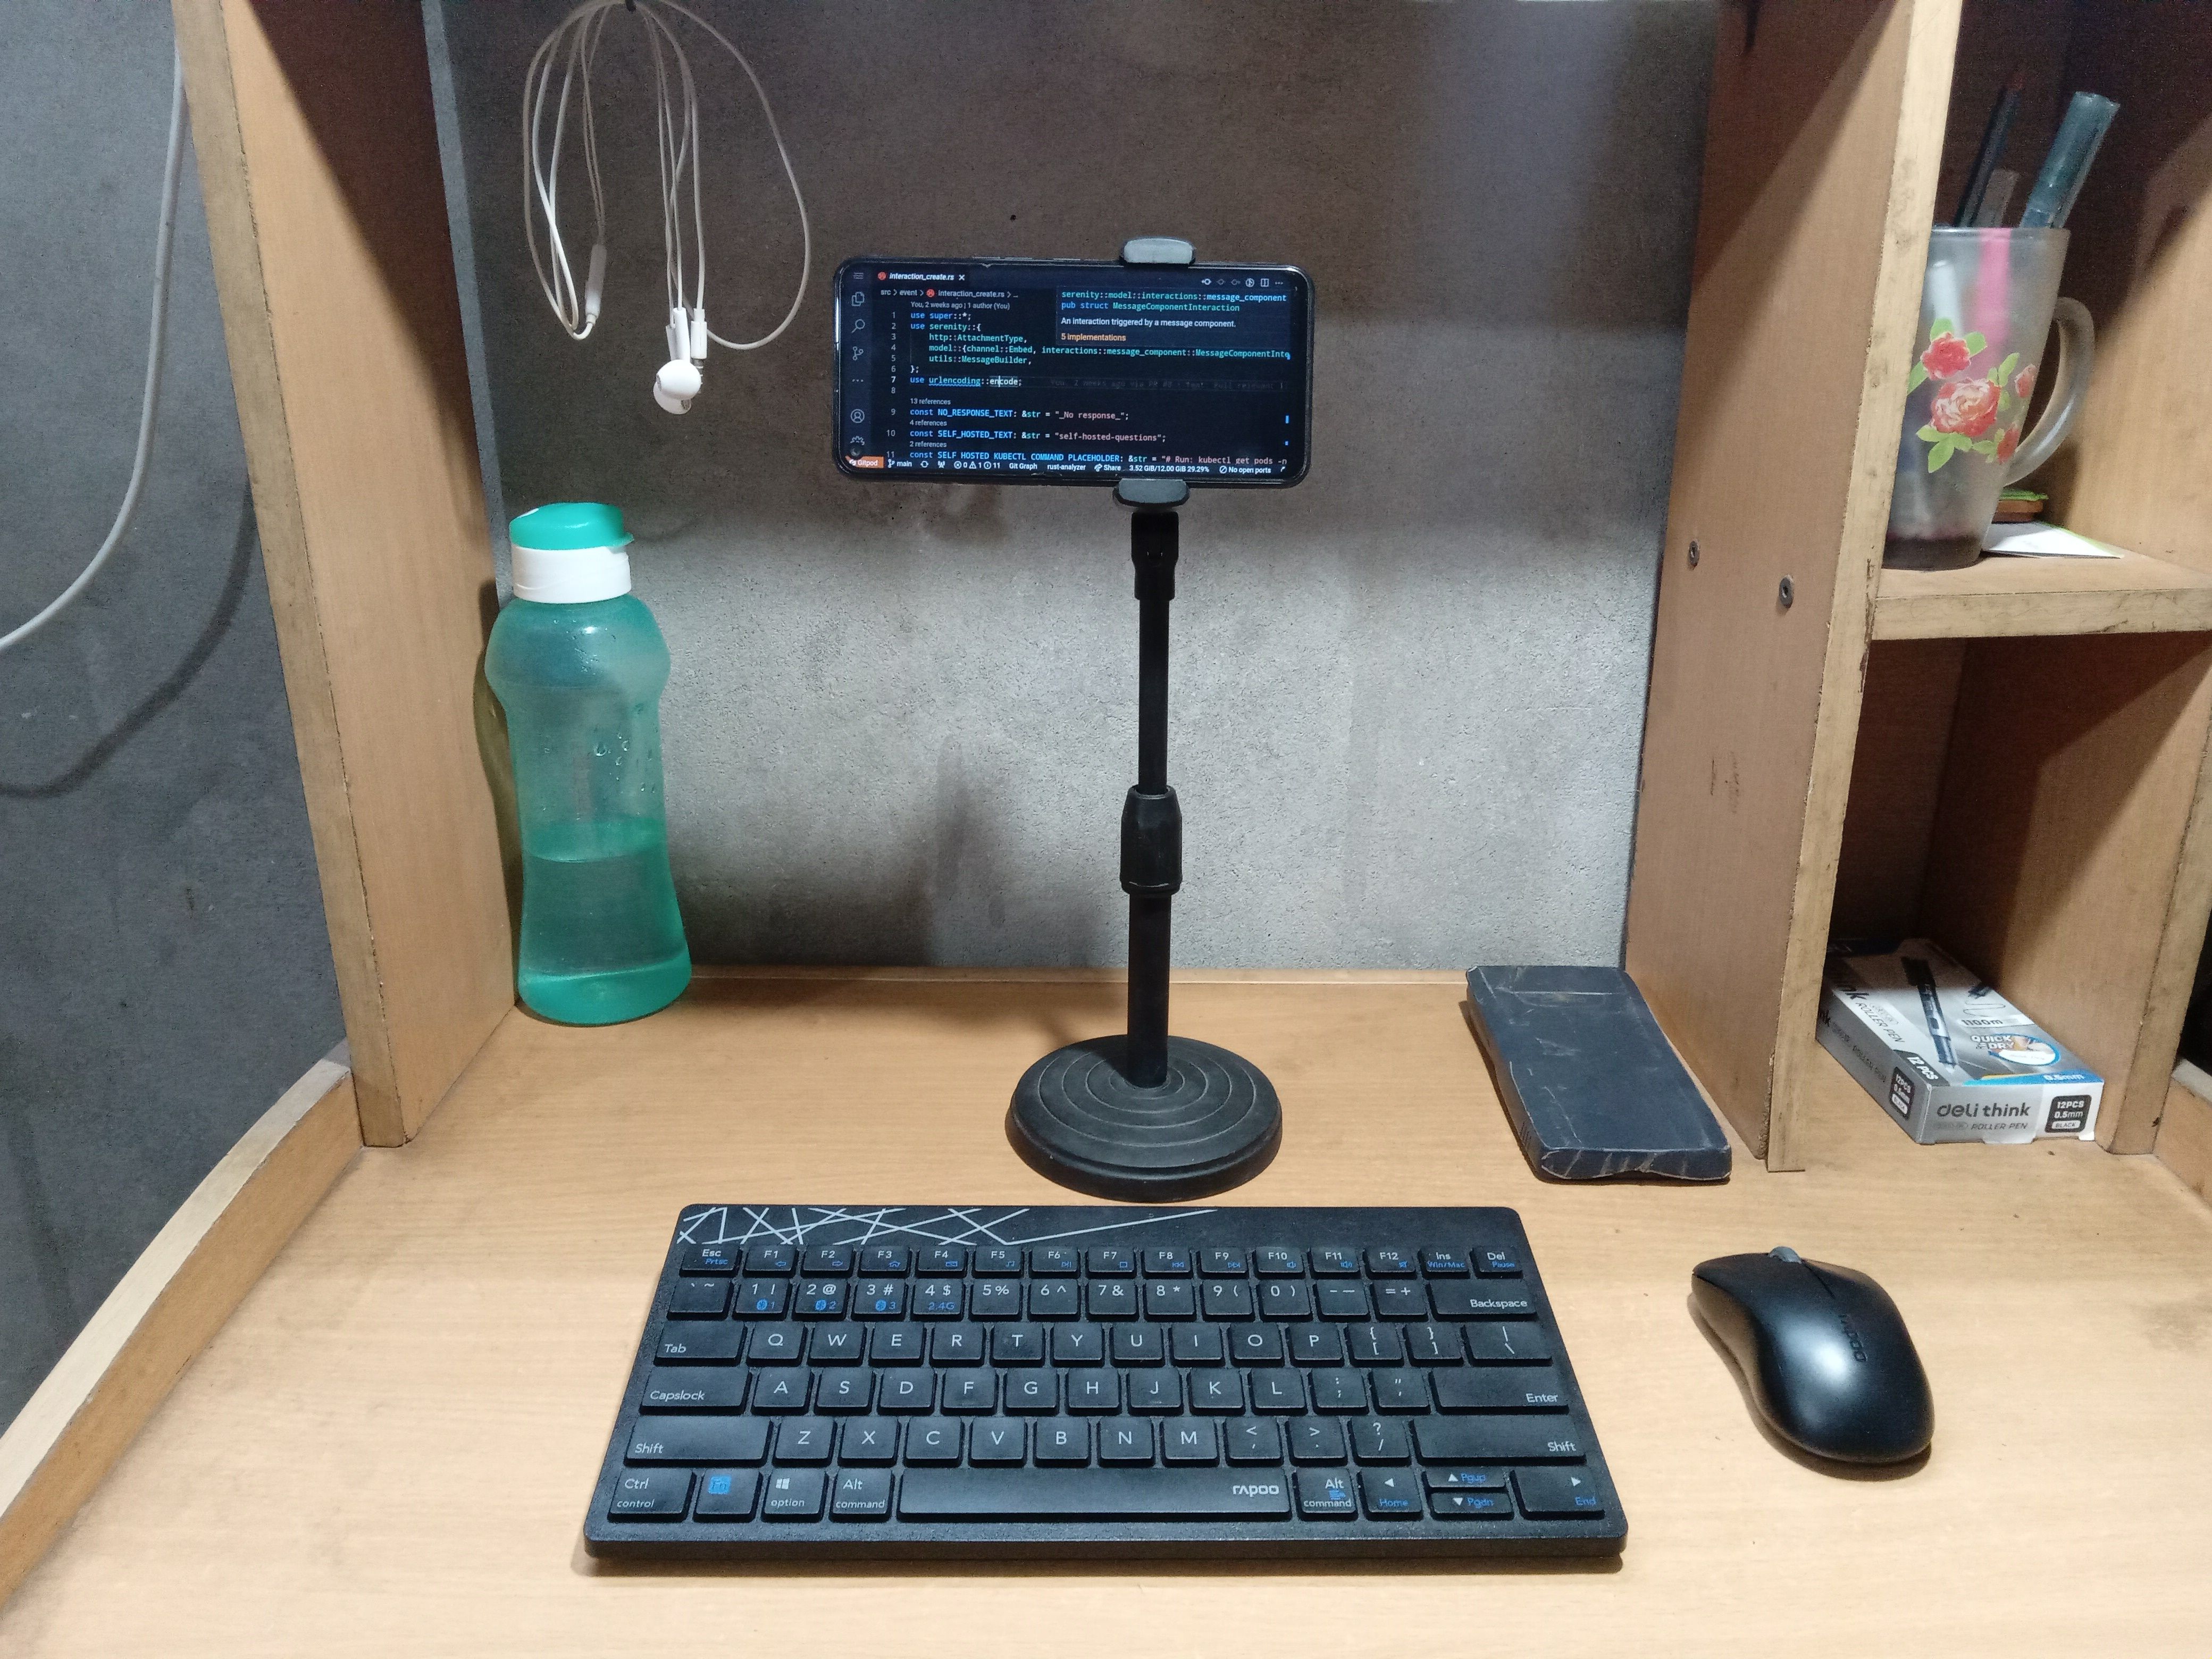 My android phone with a bluetooth keyboard and mouse